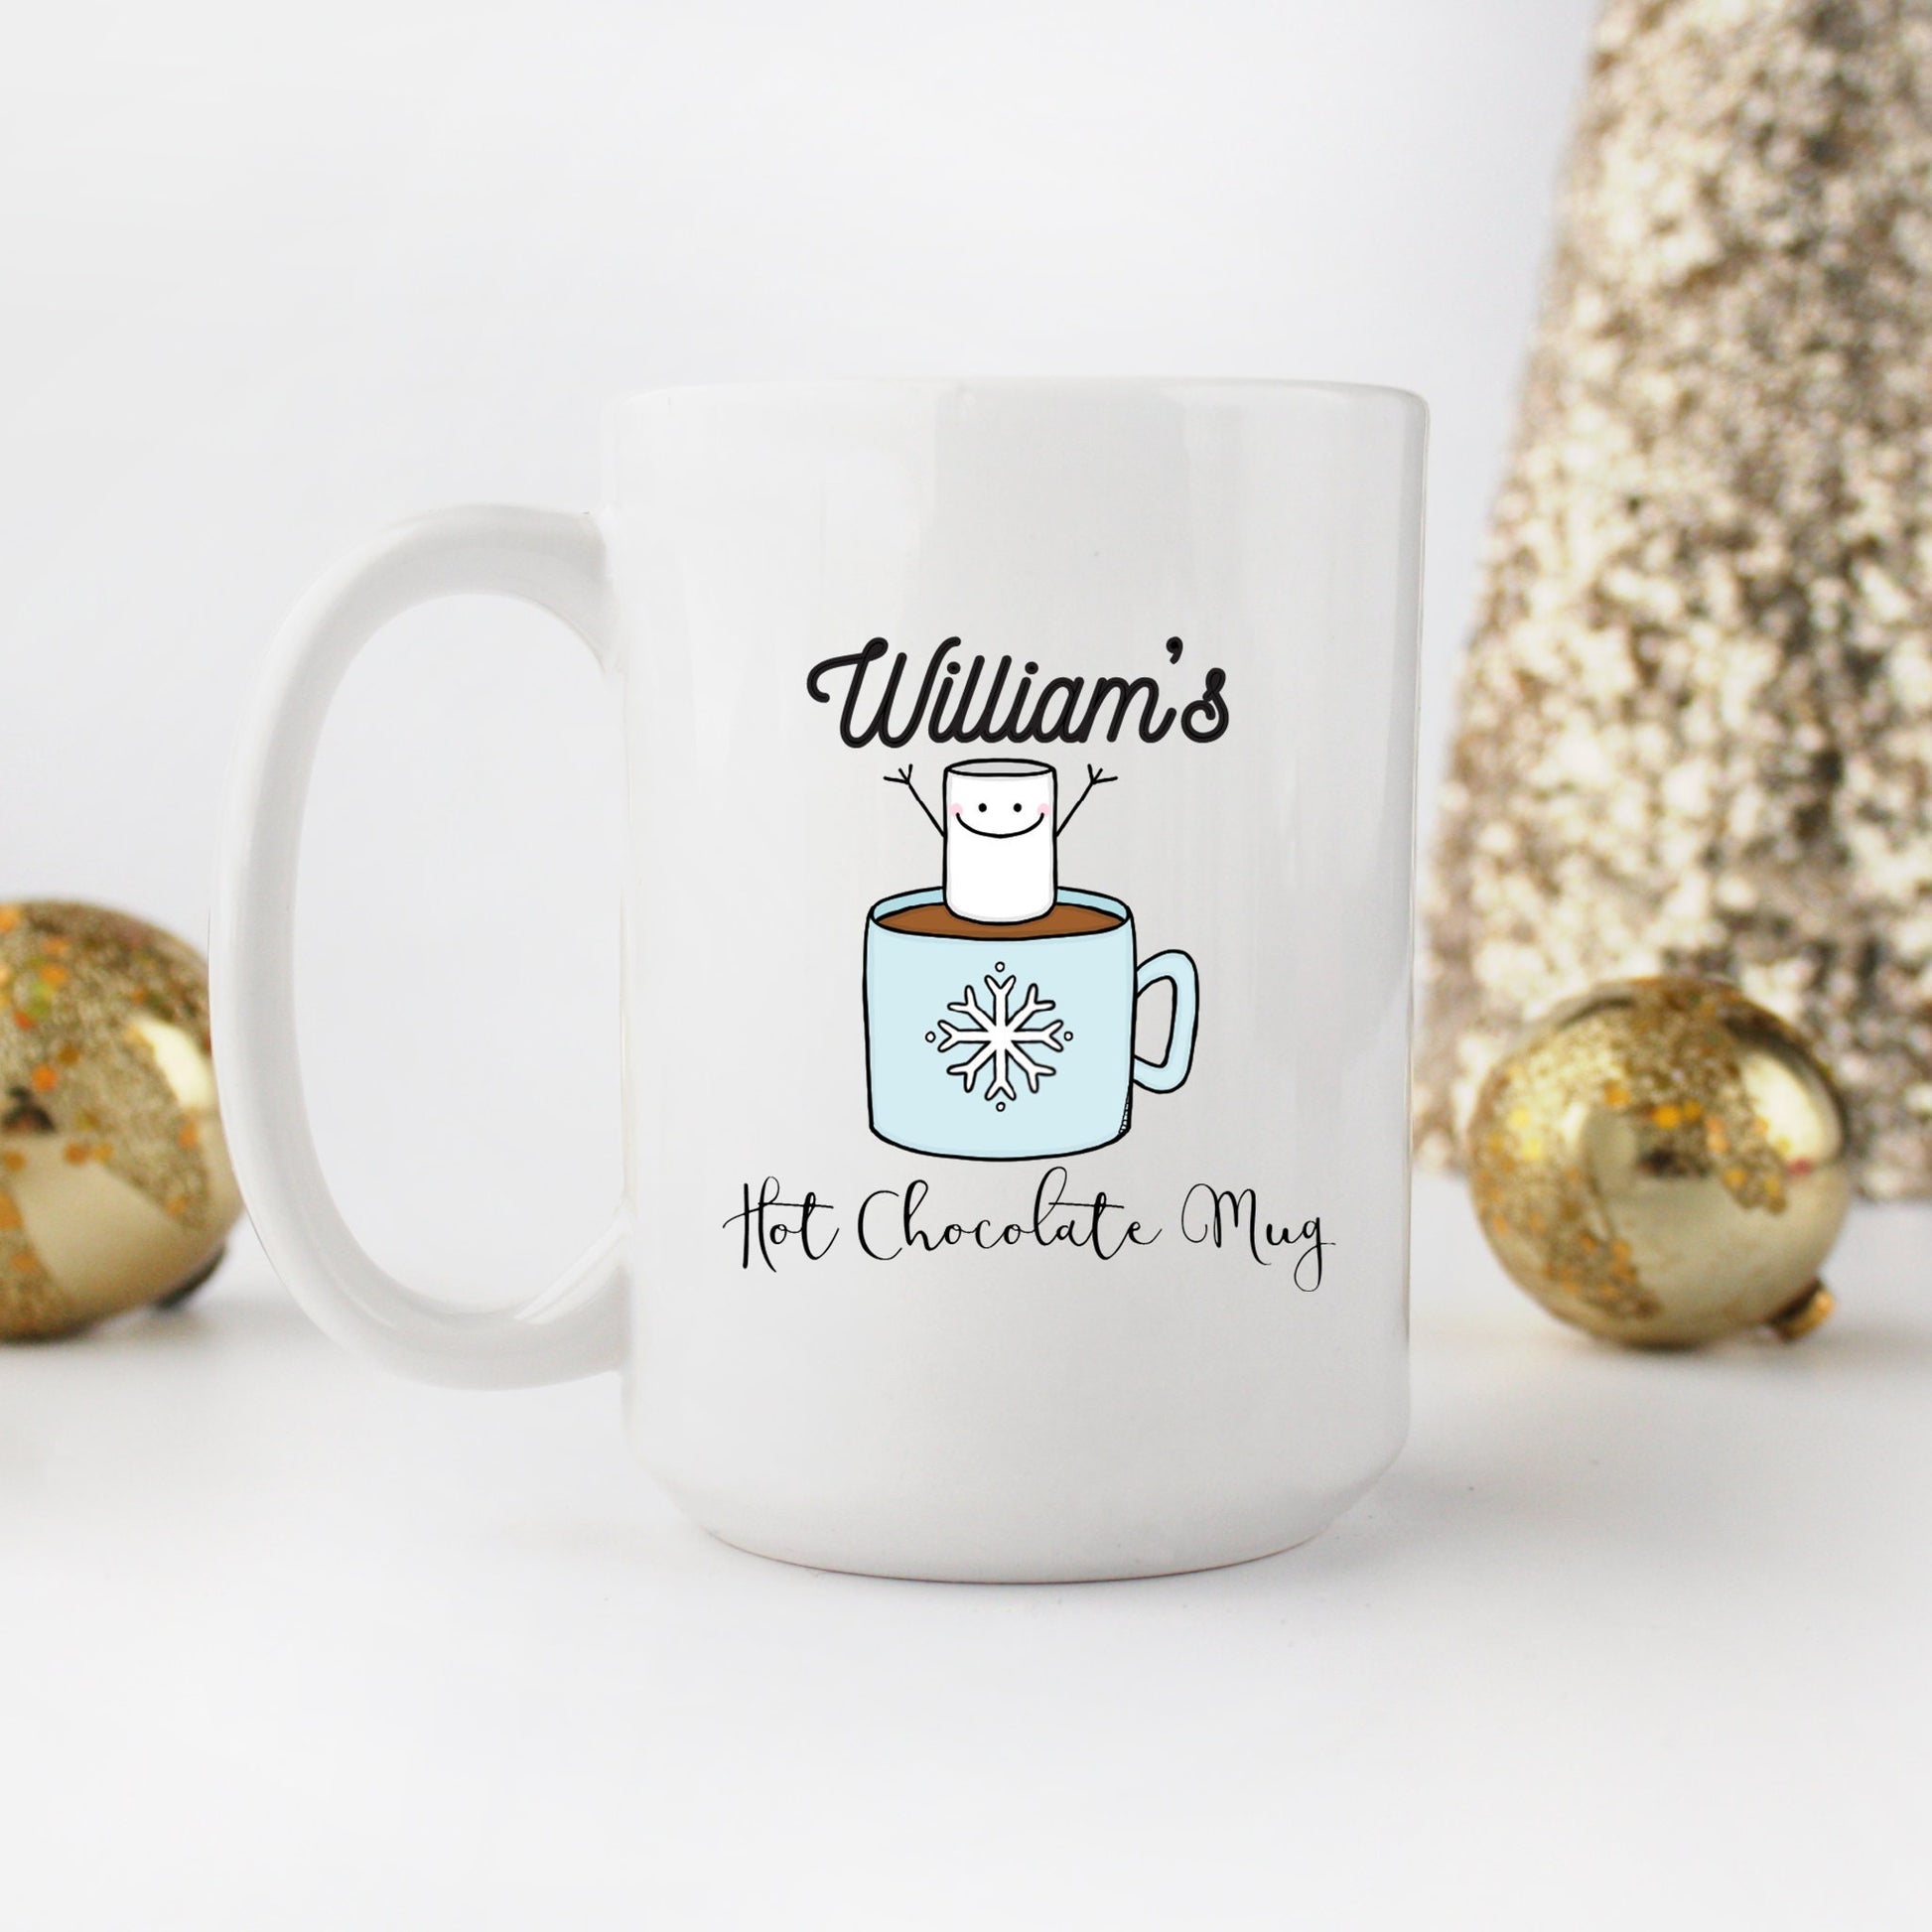 Custom mugs and Personalized mugs Large Capacity Personalize Mug with Lid  and Spoon Big Size Ceramic Gift for Coffee, Tea, Hot Chocolate order online